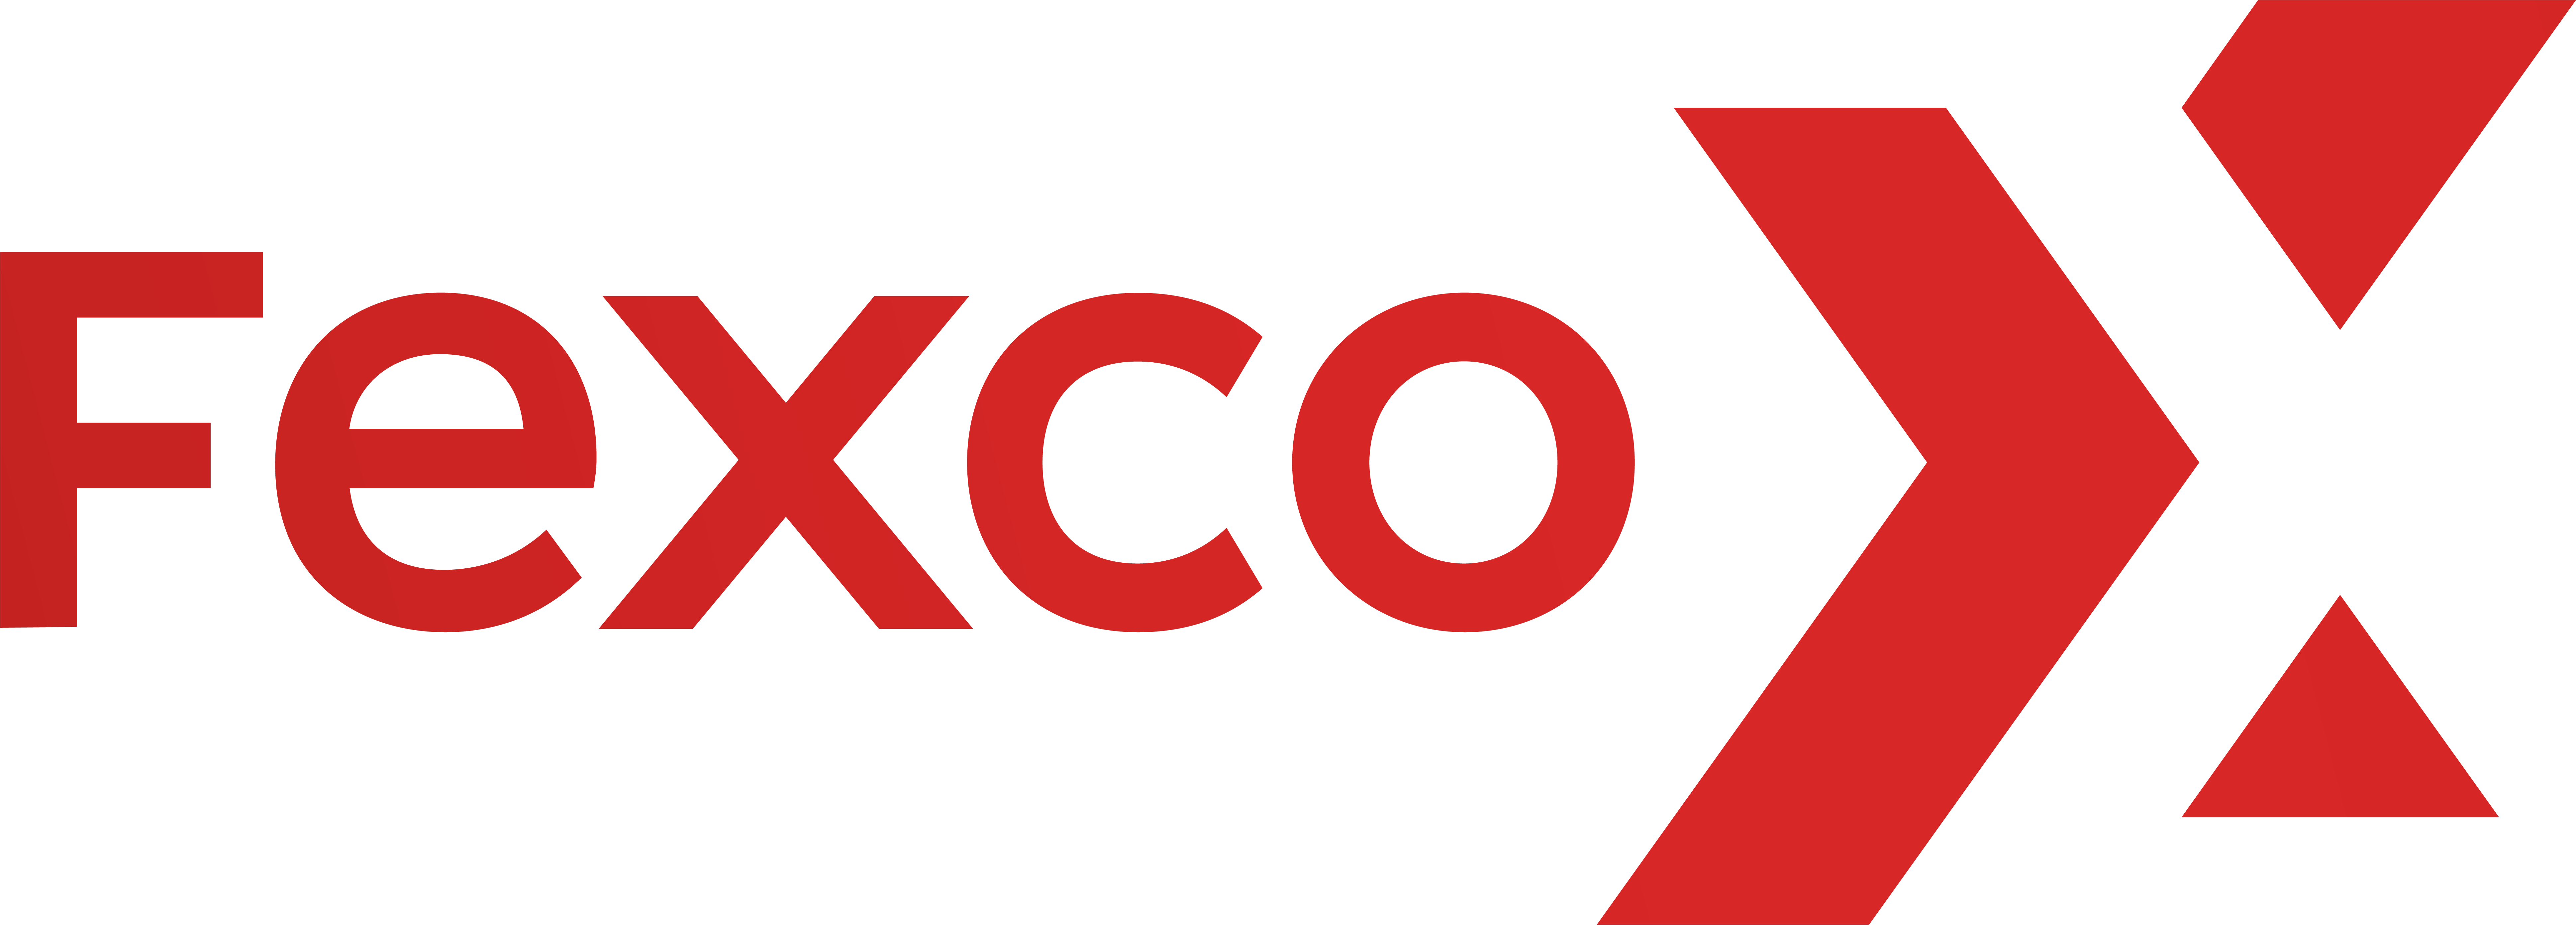 FExco.png